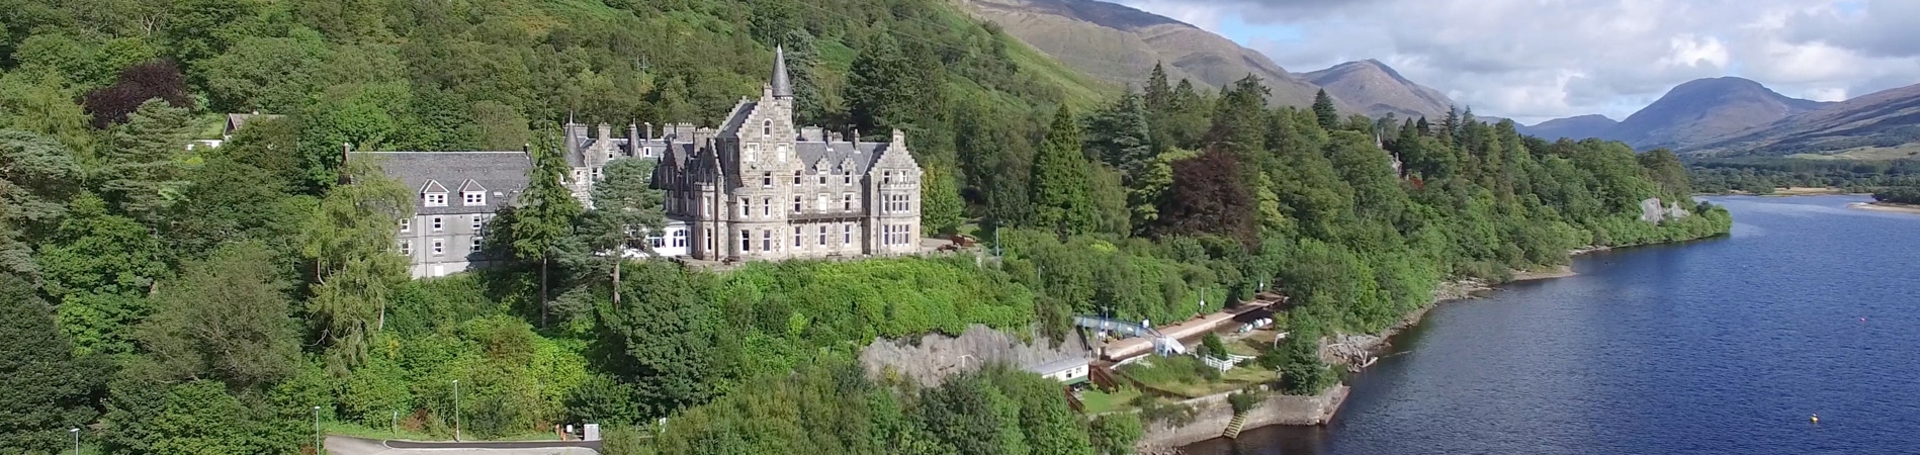 The Loch Awe Hotel overlooking the Loch Awe - Lochs & Glens Coach Holidays and Hotels